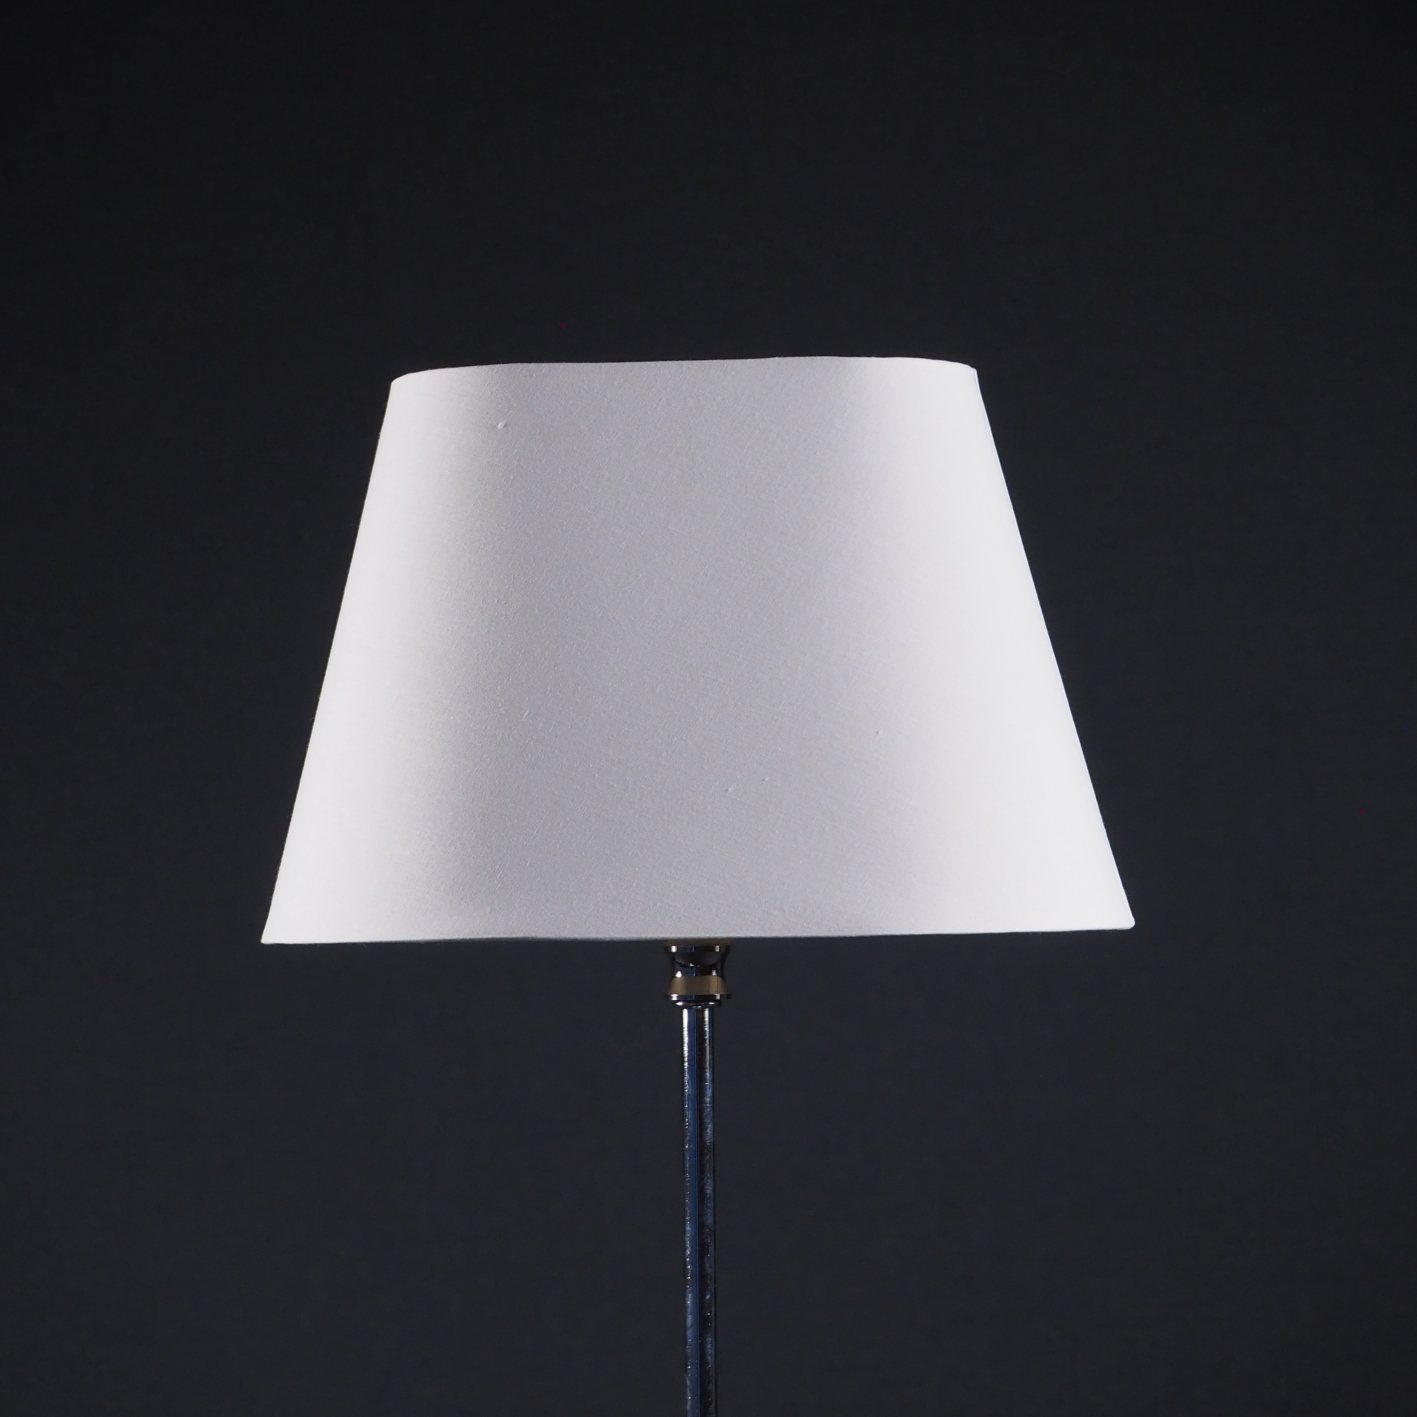 Table light with chromed-plated metal stand and textile lampshade